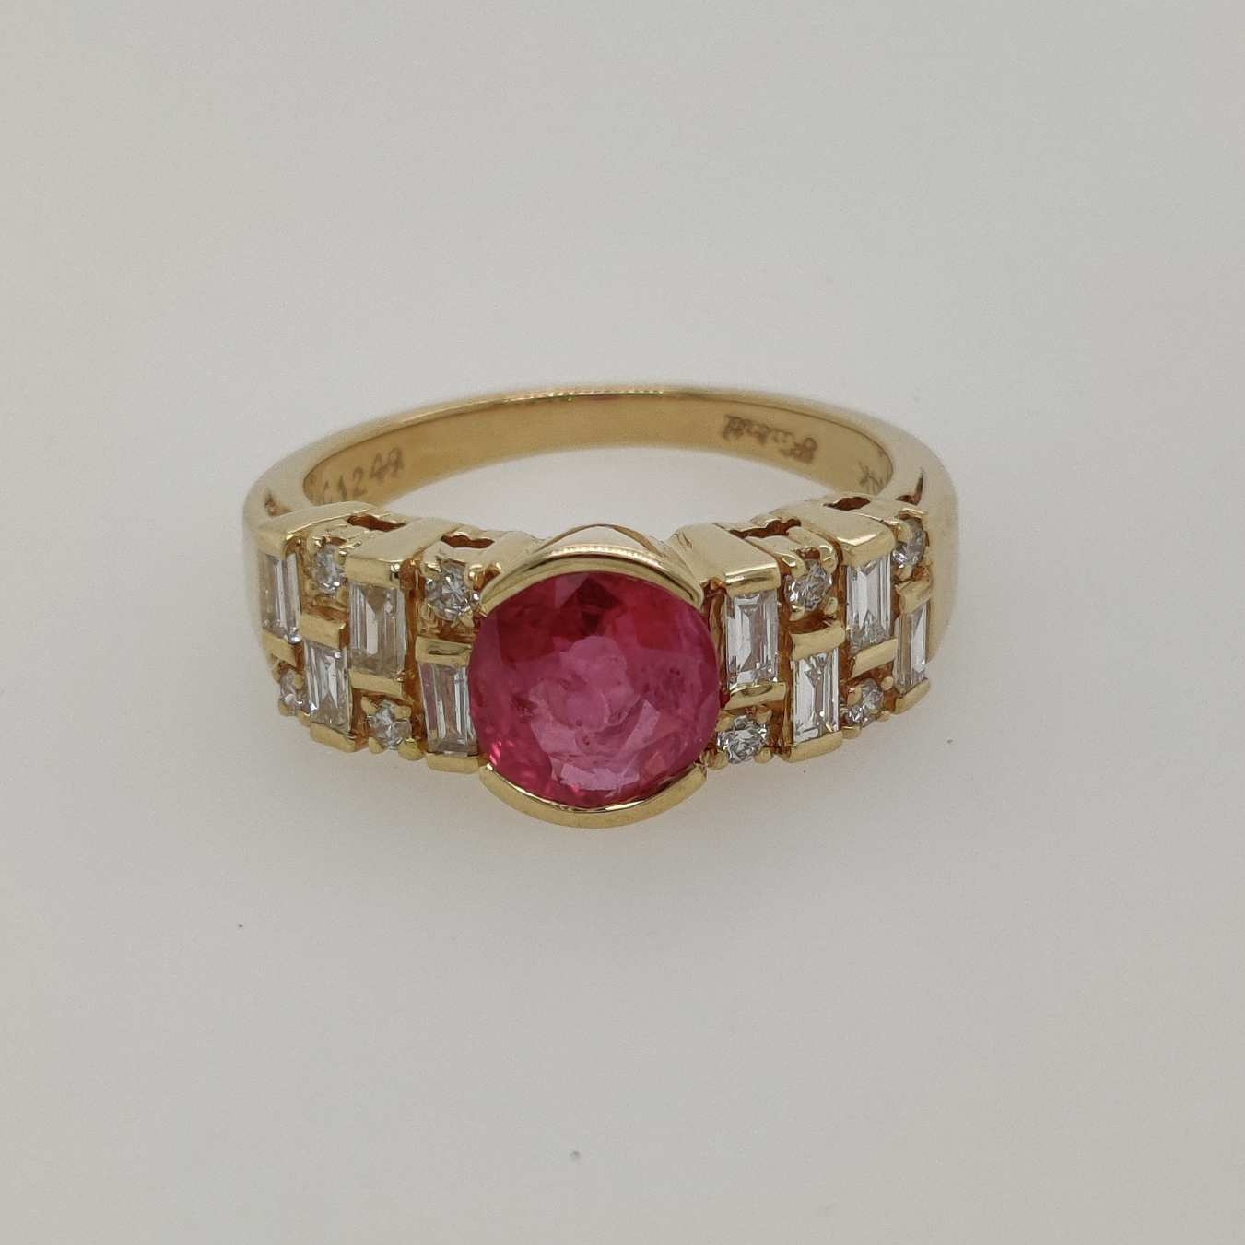 14K Yellow Gold Half Bezel Set Pink Sapphire Ring with Round and Baguette Diamond Accents Size 6.25